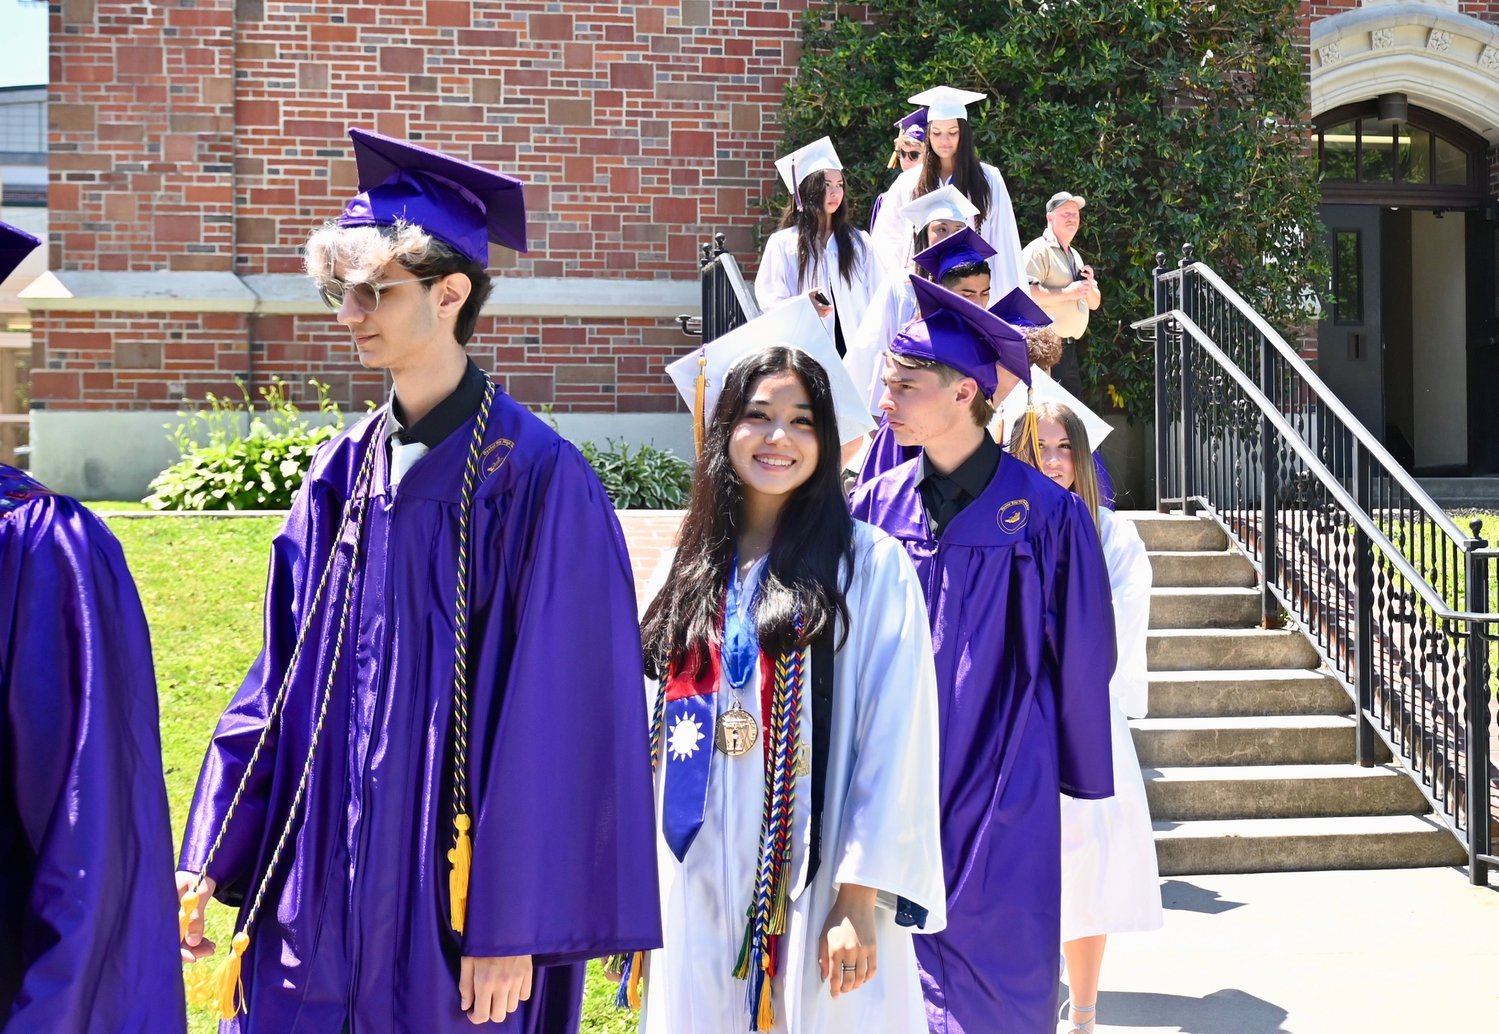 Oyster Bay High School seniors entered the commencement ceremony to “Pomp and Circumstance.”